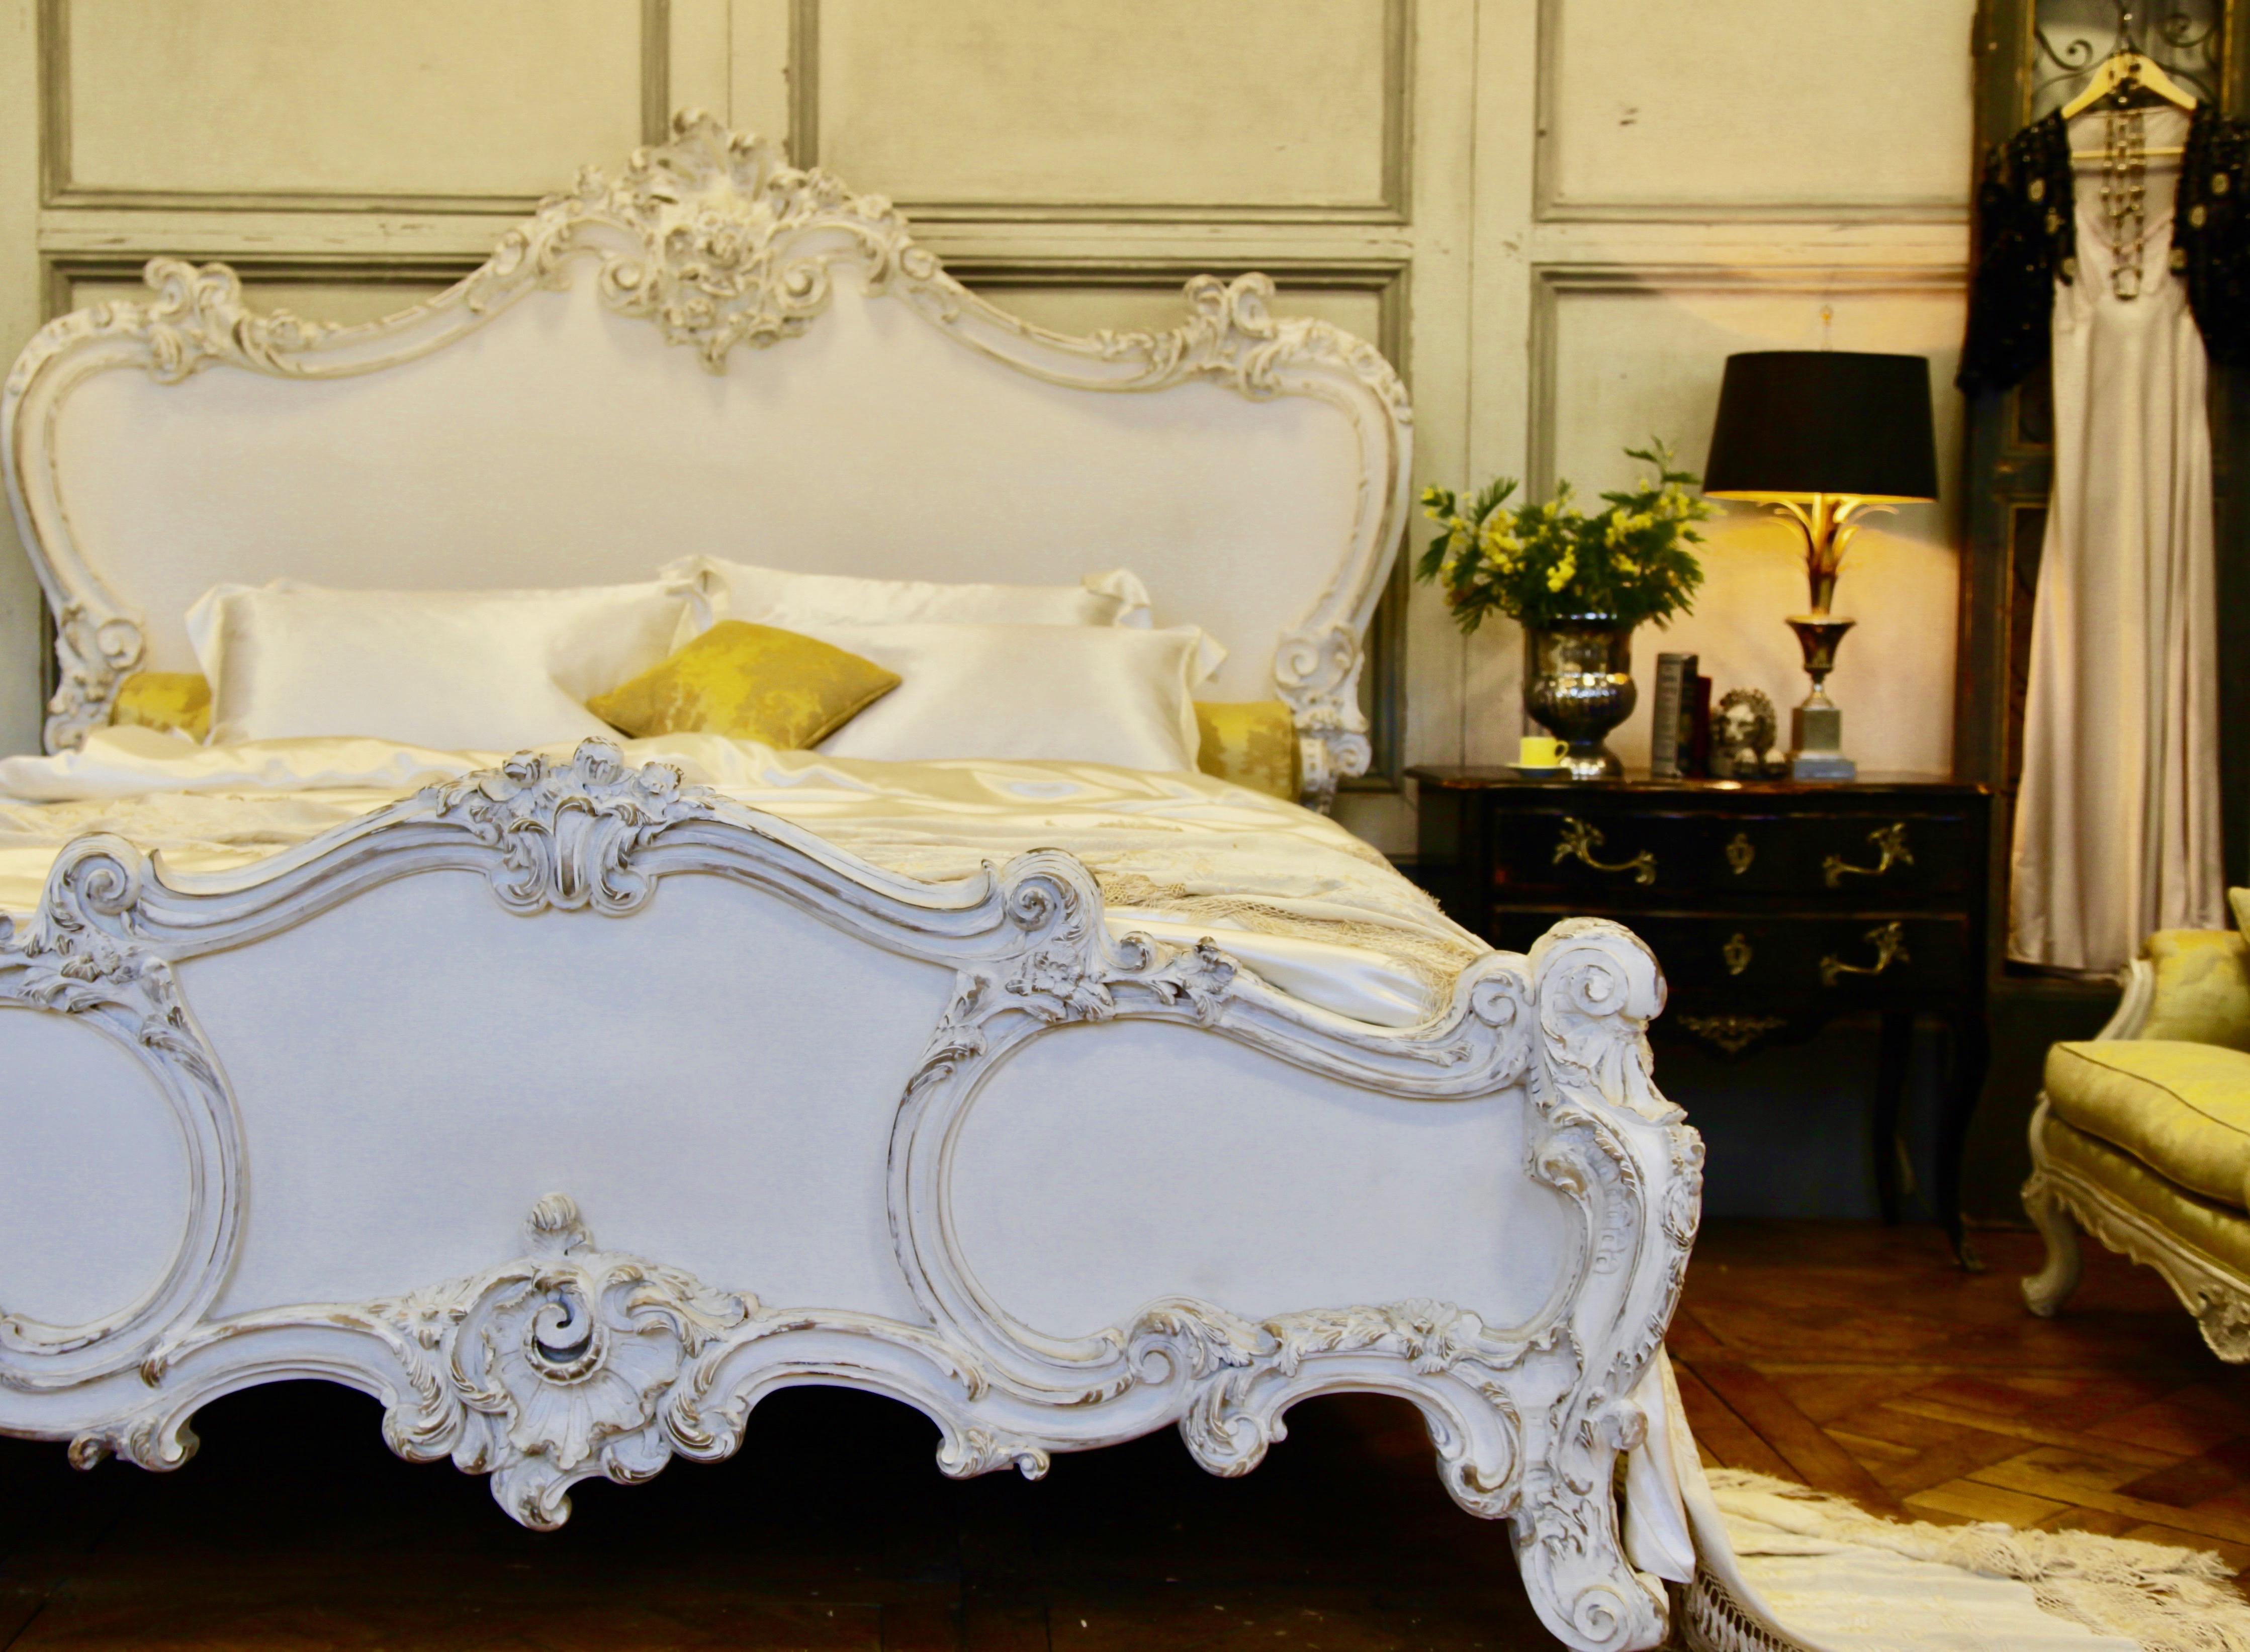 The Cherub Bed Hand Crafted In The Rococo Style Made By La Maison London 1